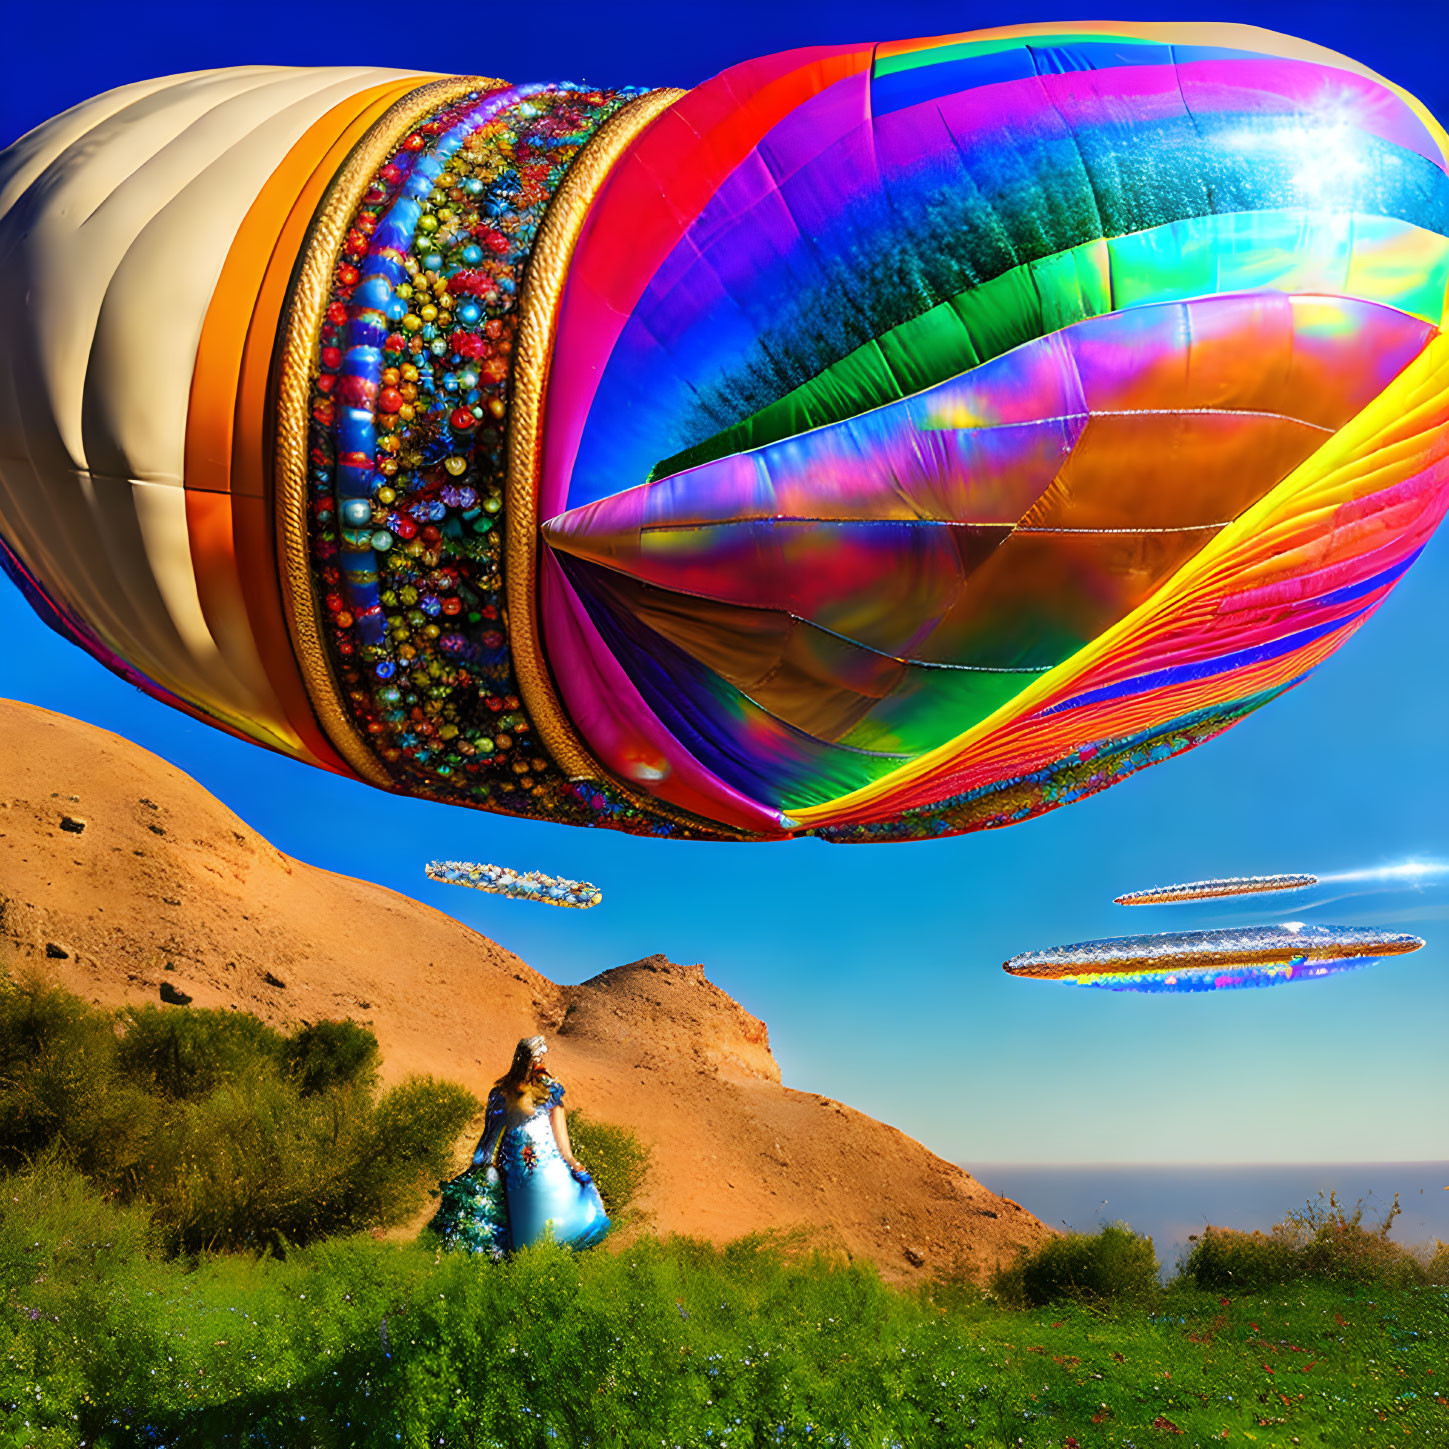 Vibrant surreal scene: person in peacock costume, oversized ornamented hot air balloons in clear